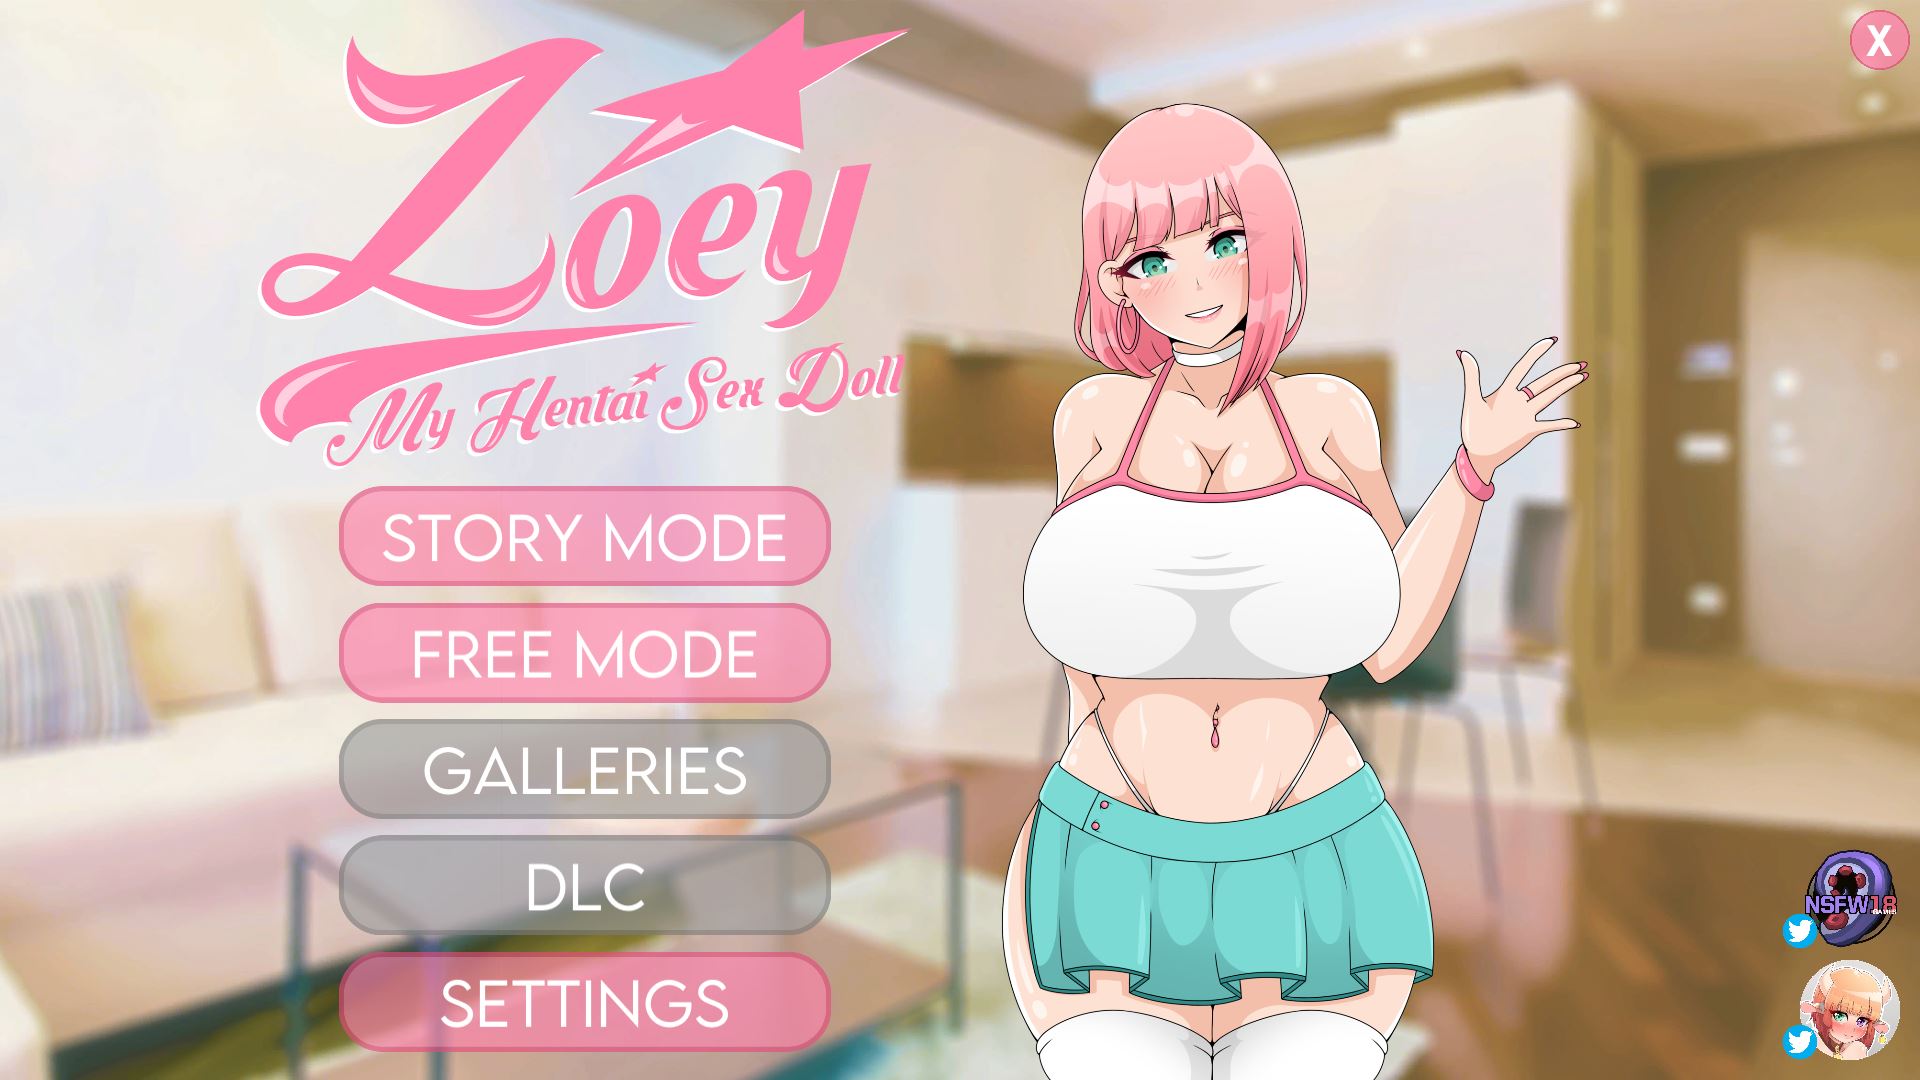 Unity] Zoey: My Hentai Sex Doll - v1.1 by NSFW18 Games 18+ Adult xxx Porn Game  Download